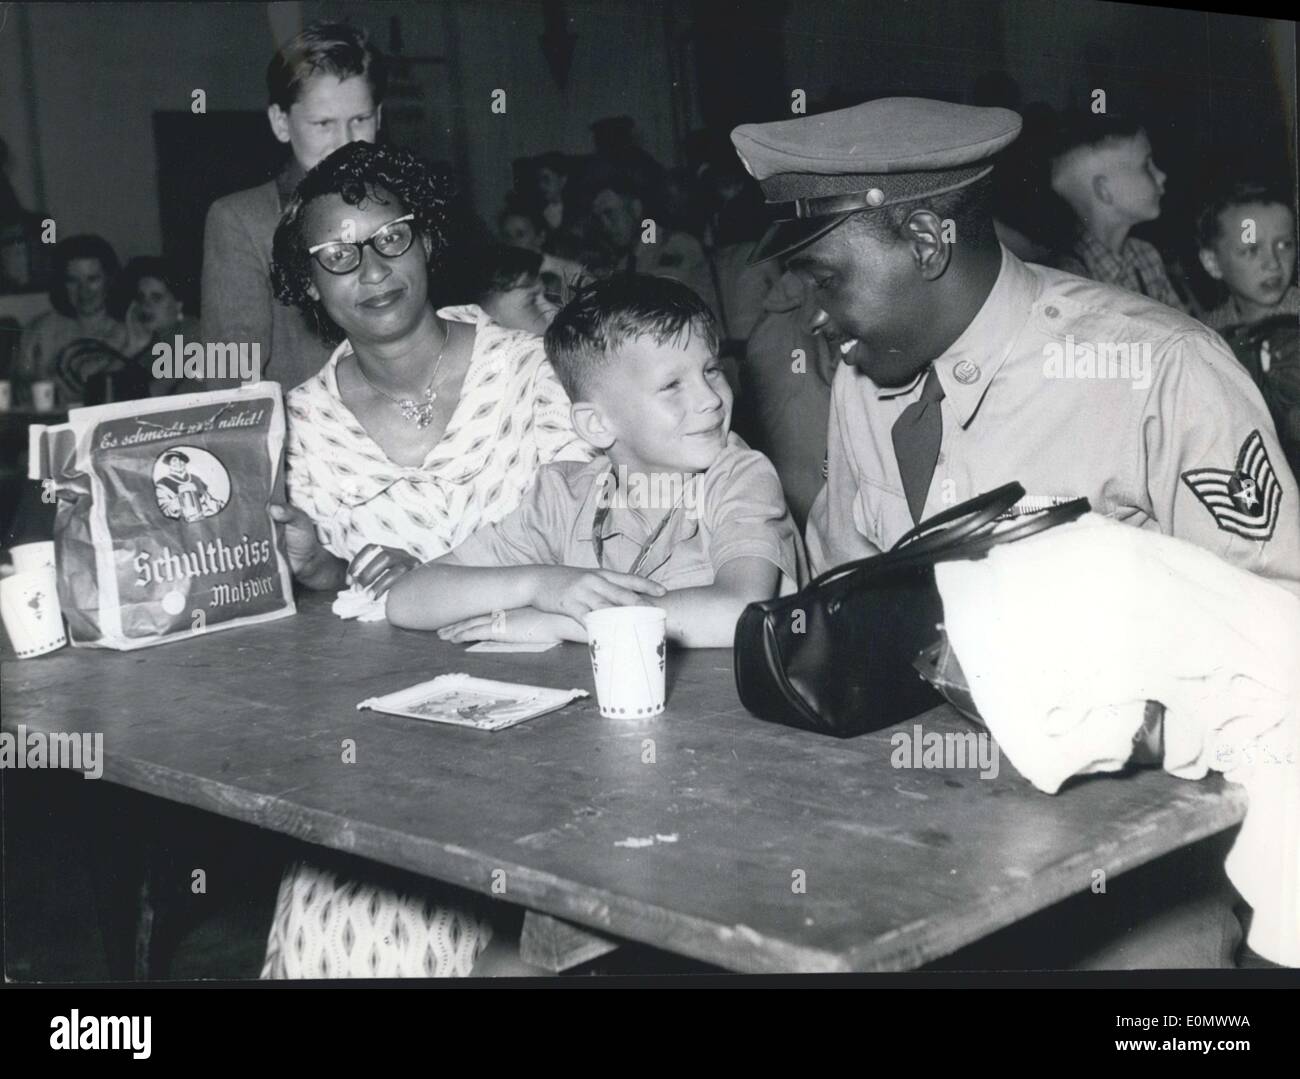 Jul. 11, 1956 - Pictured is Sergeant James E. Carter and his wife as they meet six year old Hans-Juergen Trosiener. The sergeant was a participant in the children's airlift in West Germany. Stock Photo